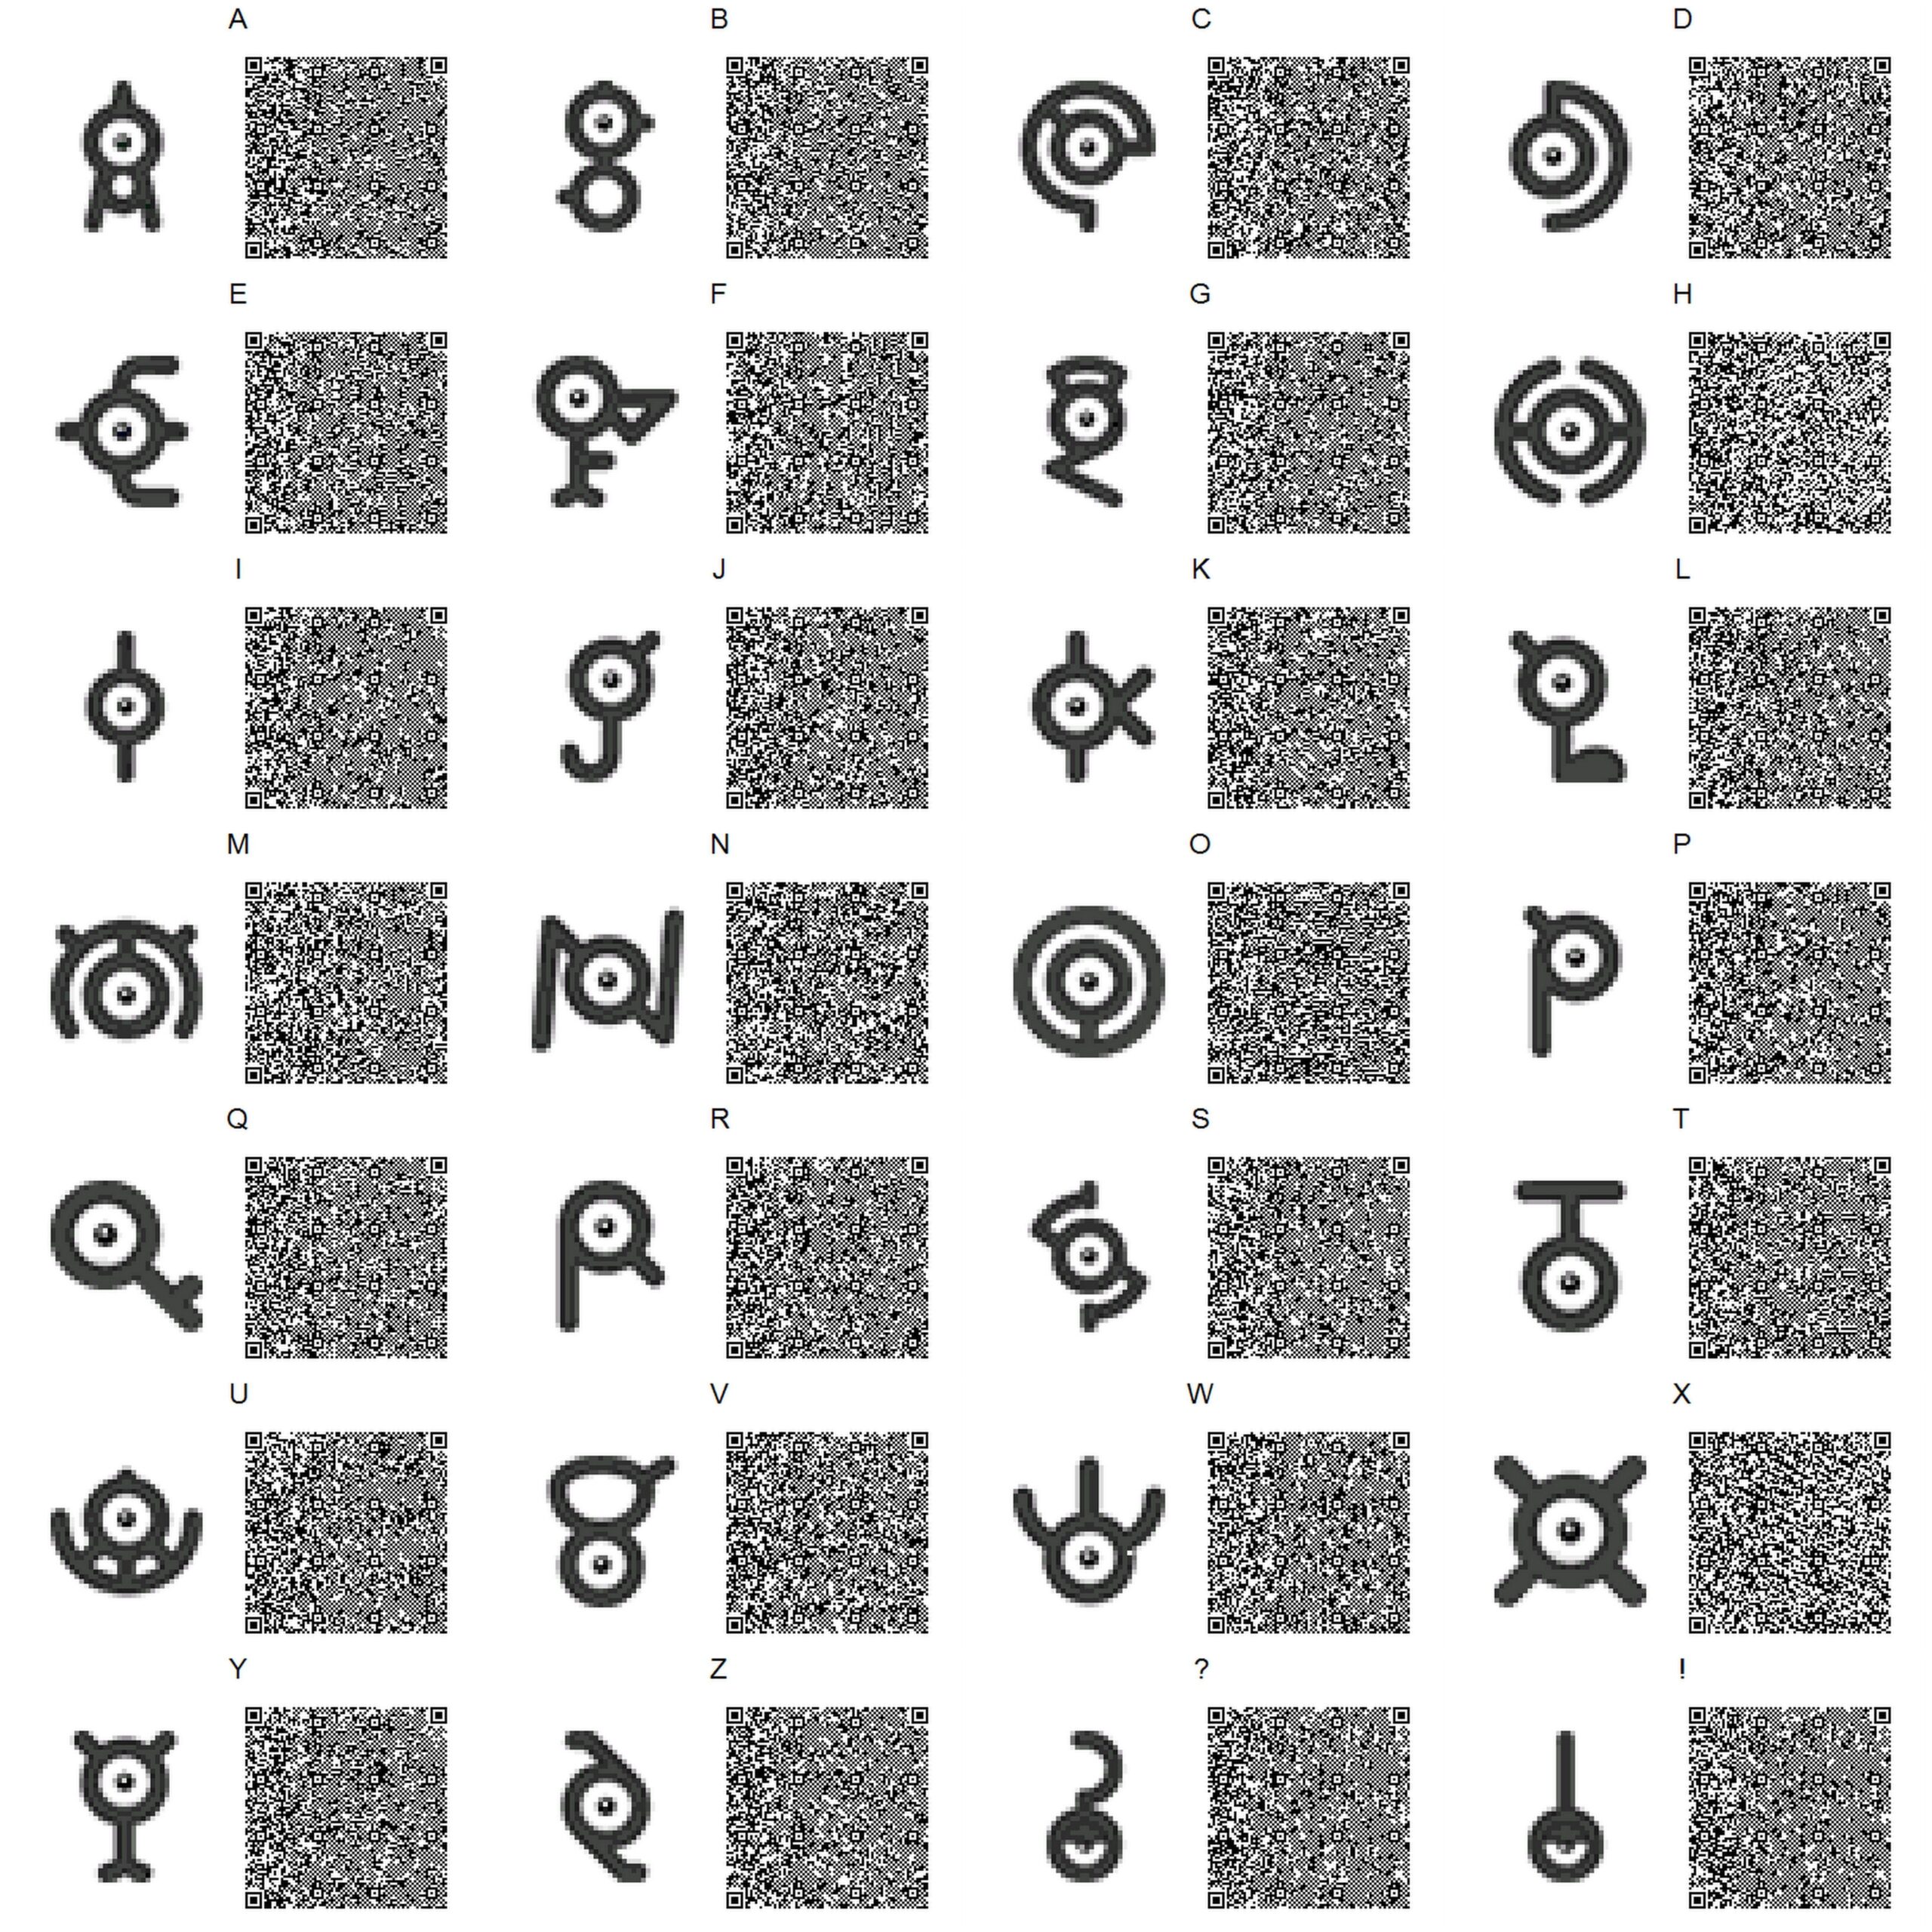 Pokemon Unown Forms Pattern for ACNL by toxicsquall